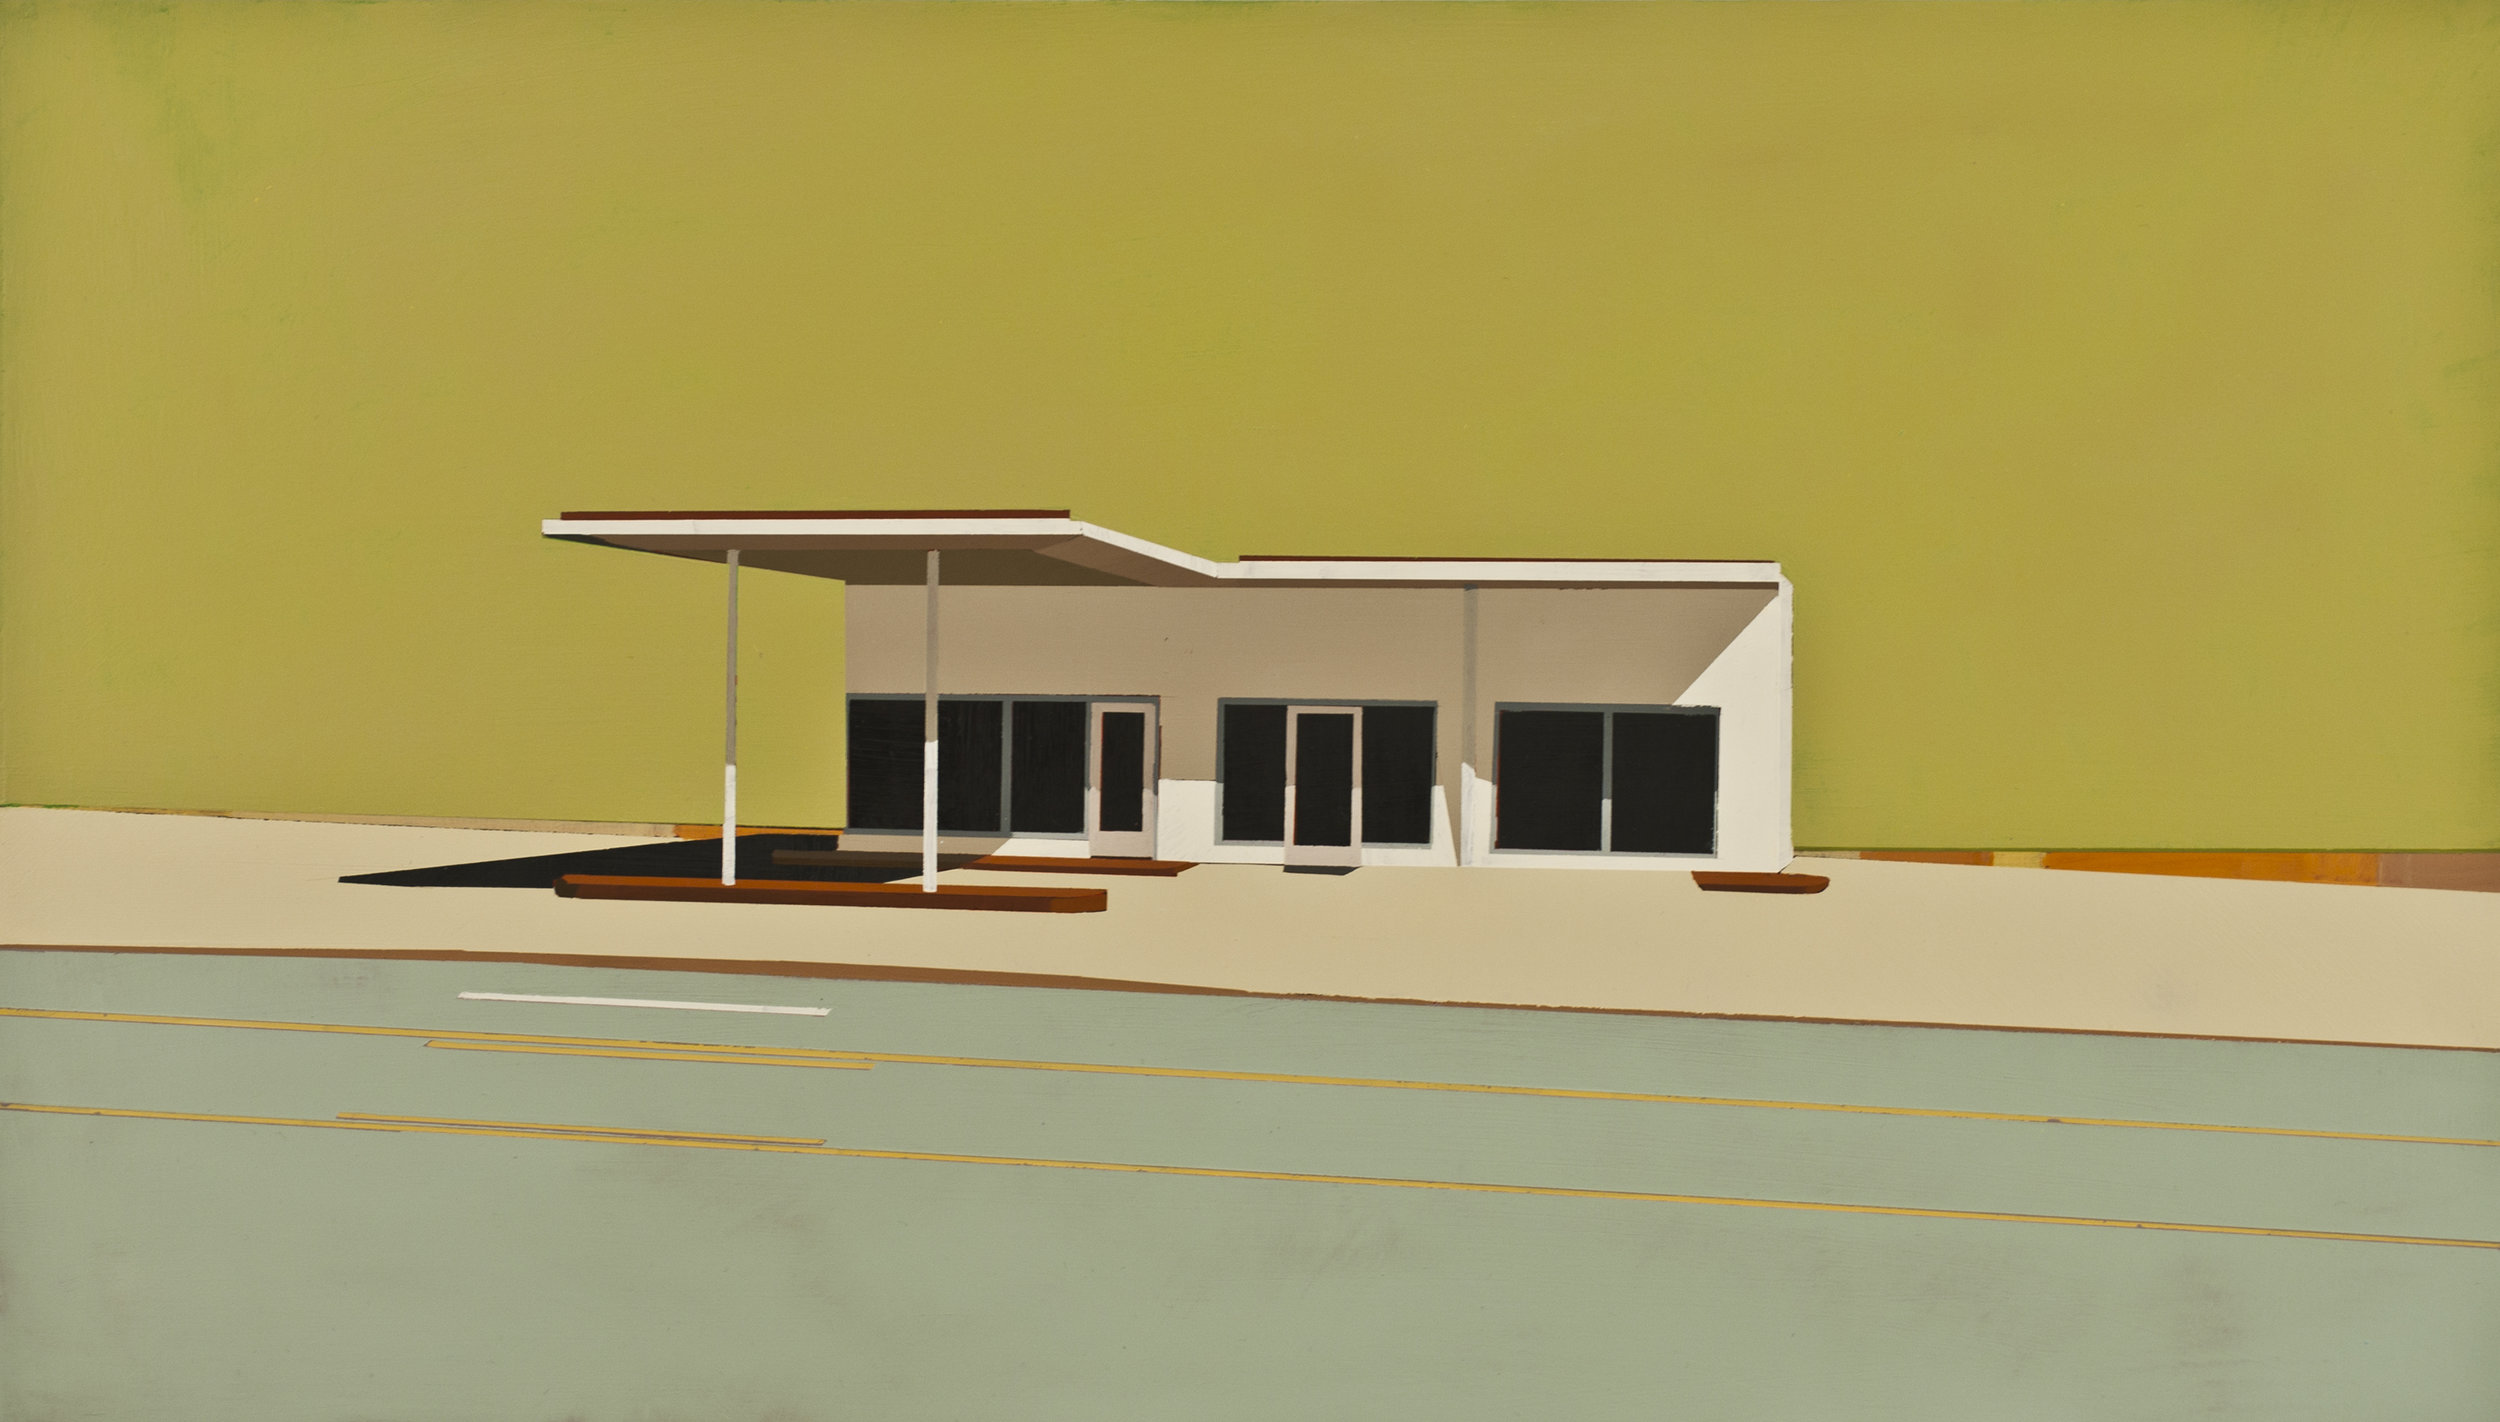    SUNDAY TIMES GAS STATION IN SPINEY SEA URCHIN      oil on panel | 12"&nbsp;x 21" &nbsp; 2012  